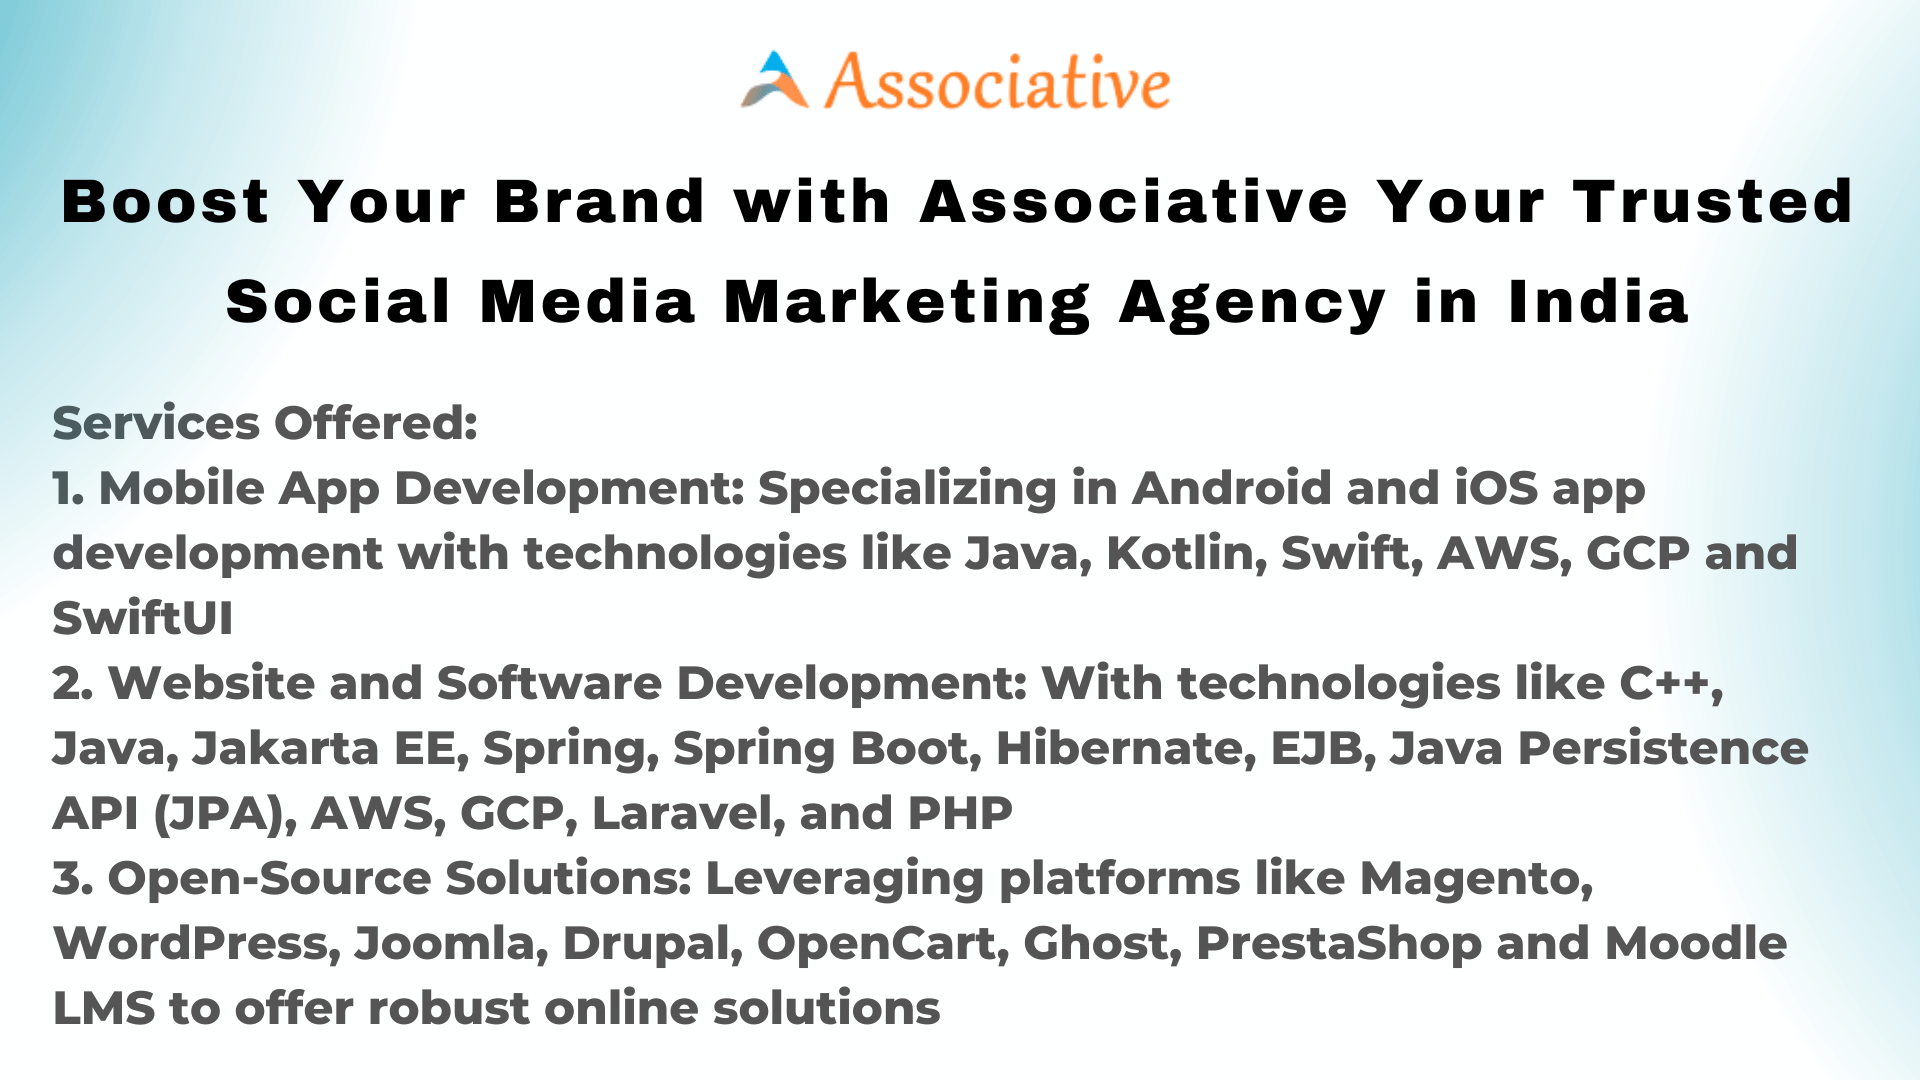 Boost Your Brand with Associative Your Trusted Social Media Marketing Agency in India